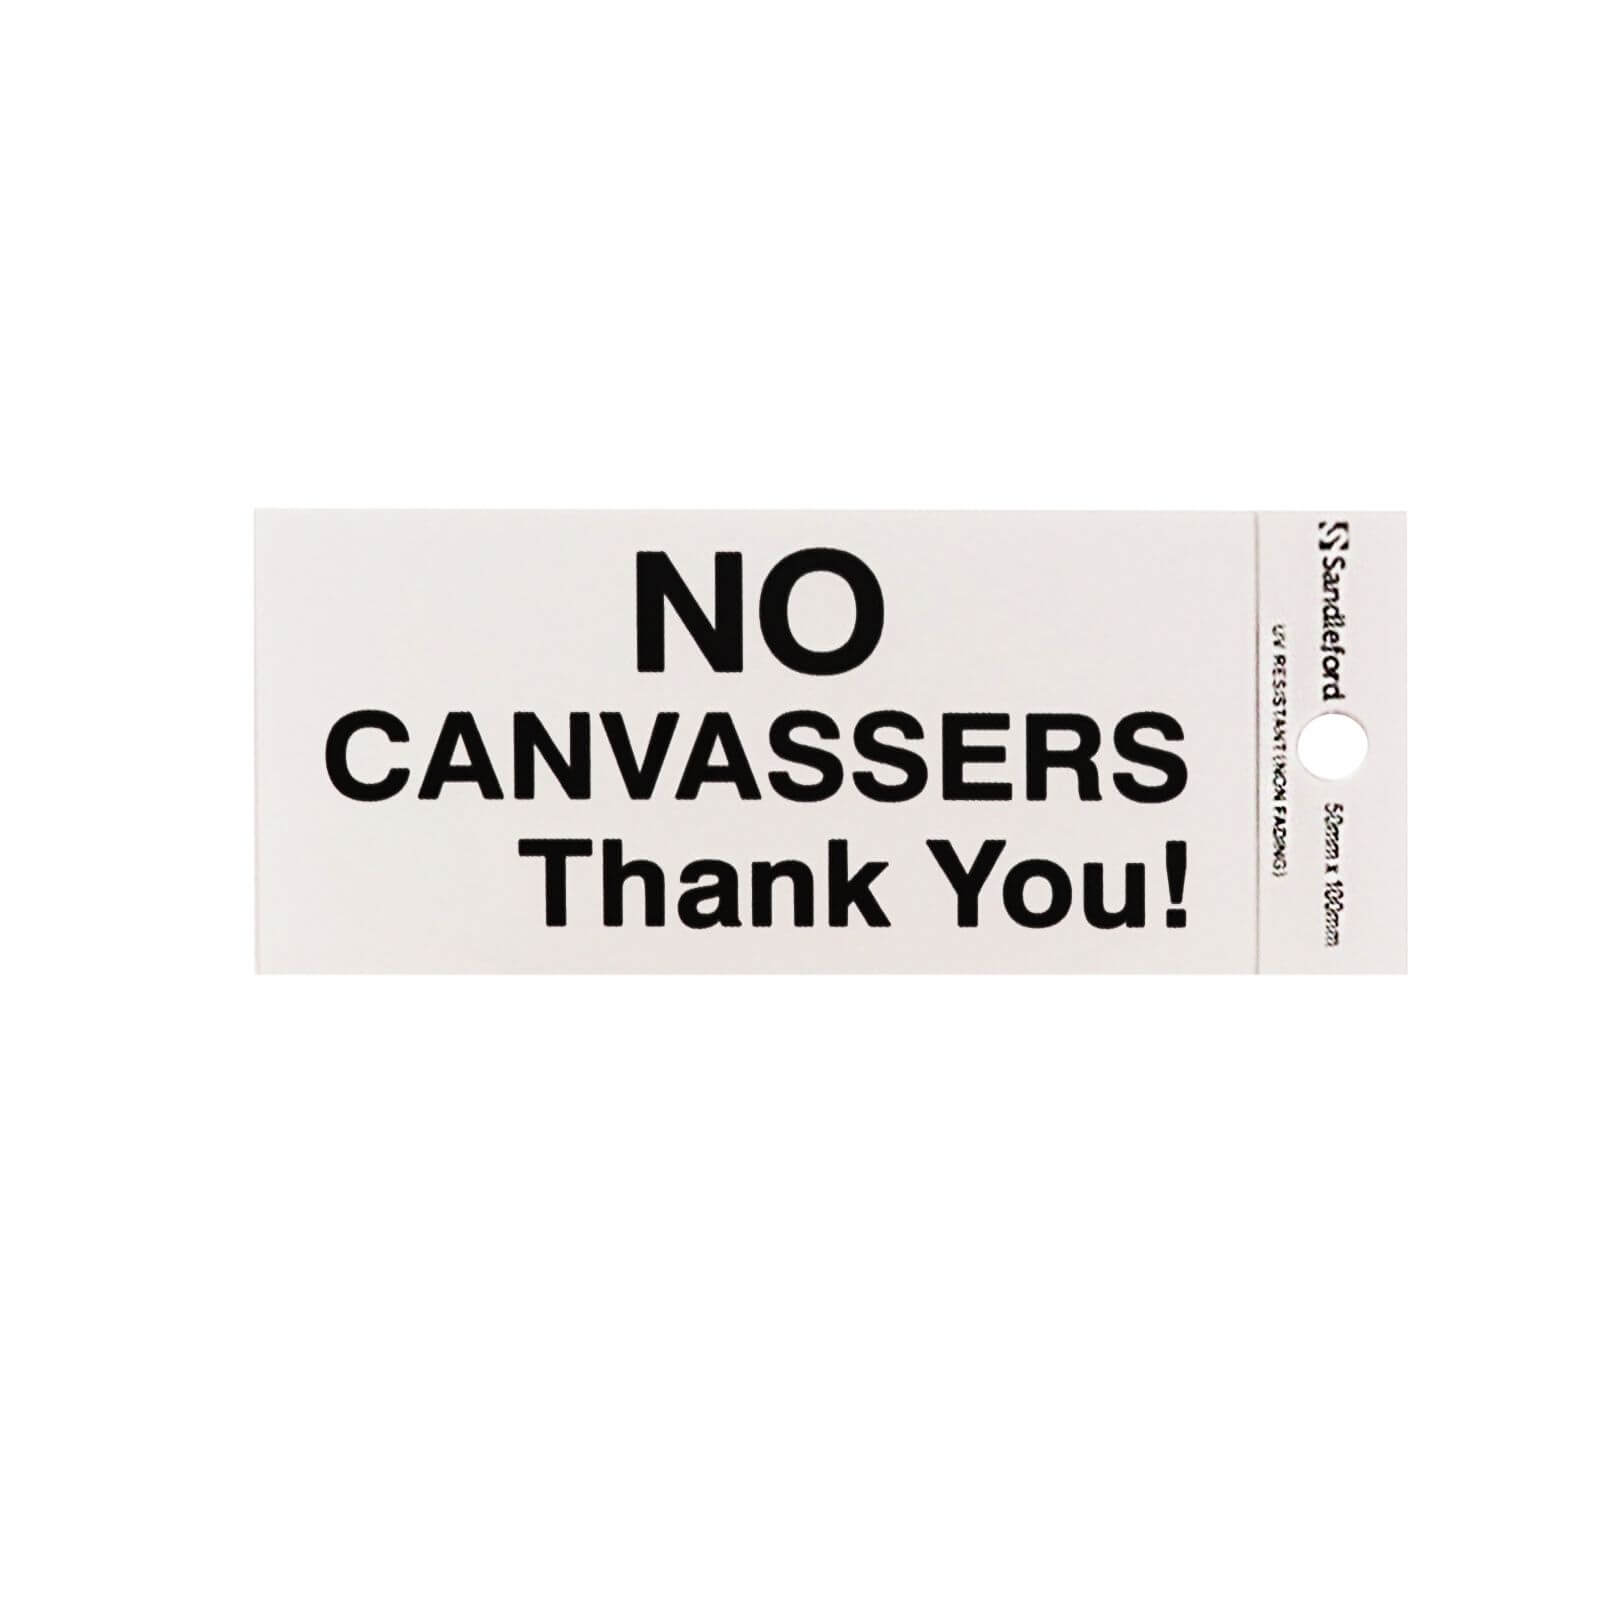 Self Adhesive No Canvassers Thank You Sign - 100 x 50mm